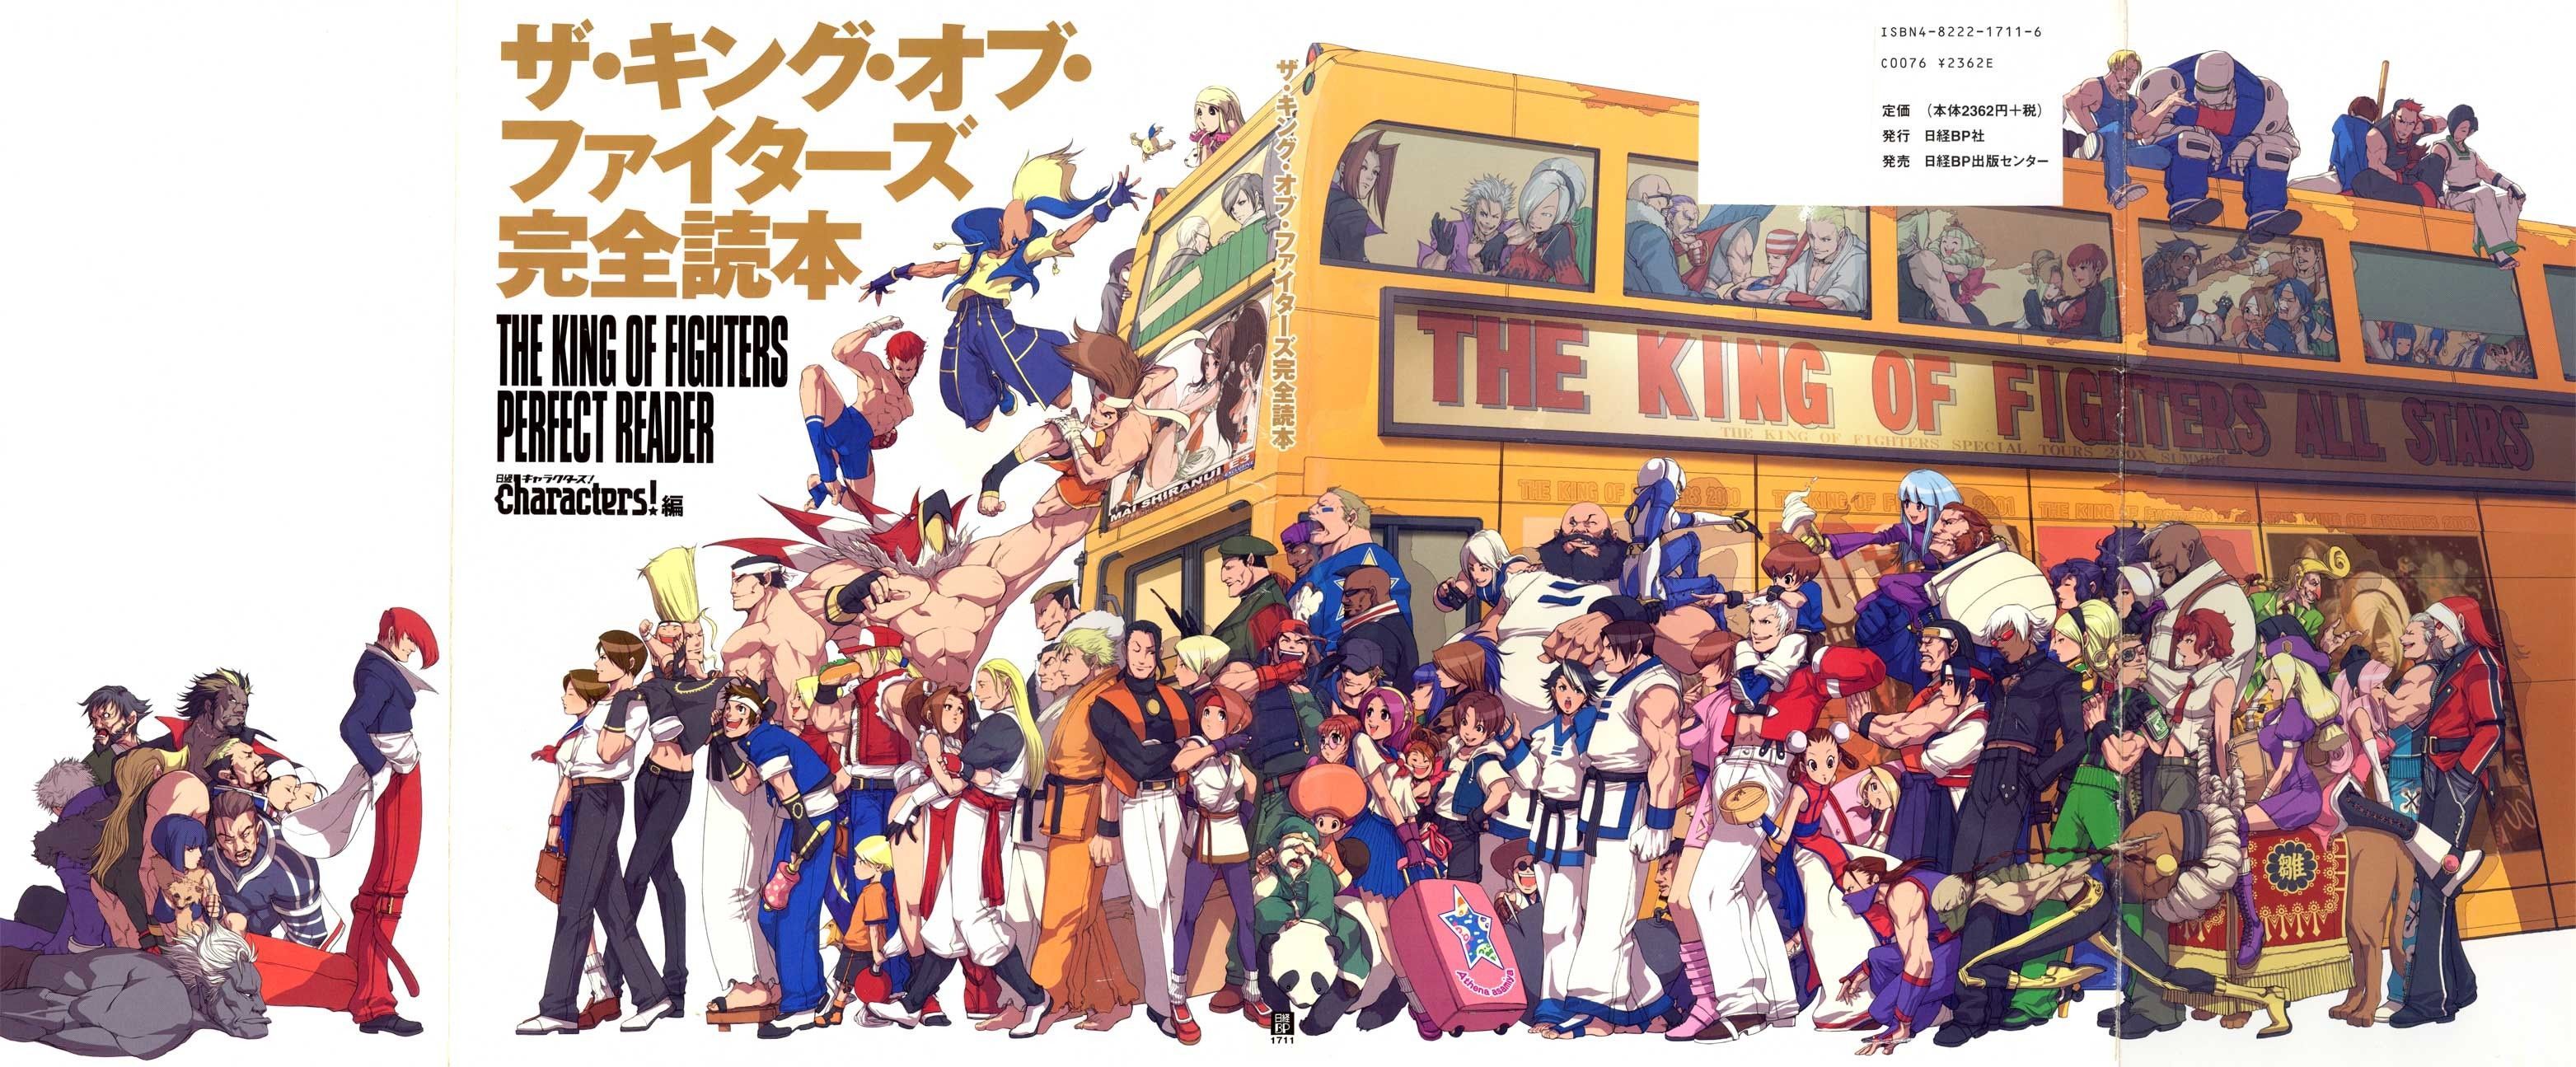 The King of Fighters Wallpaper Free The King of Fighters